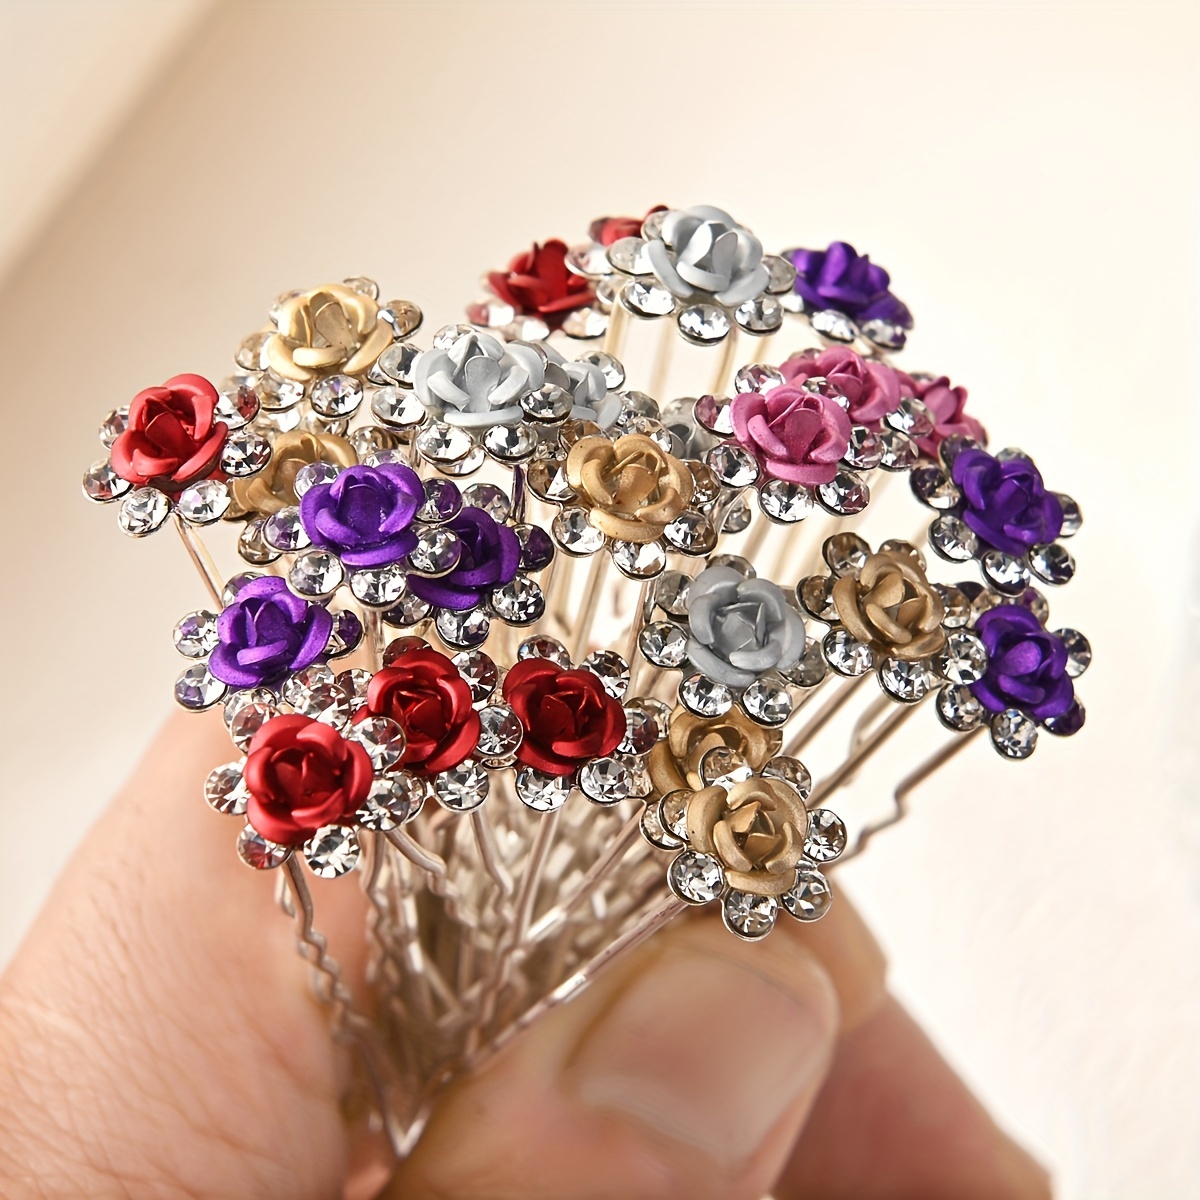 

20-piece Elegant U-shaped Hair Clips Set With Sparkling Rhinestones & Colorful Roses - Perfect For Bridal & Everyday Hairstyles